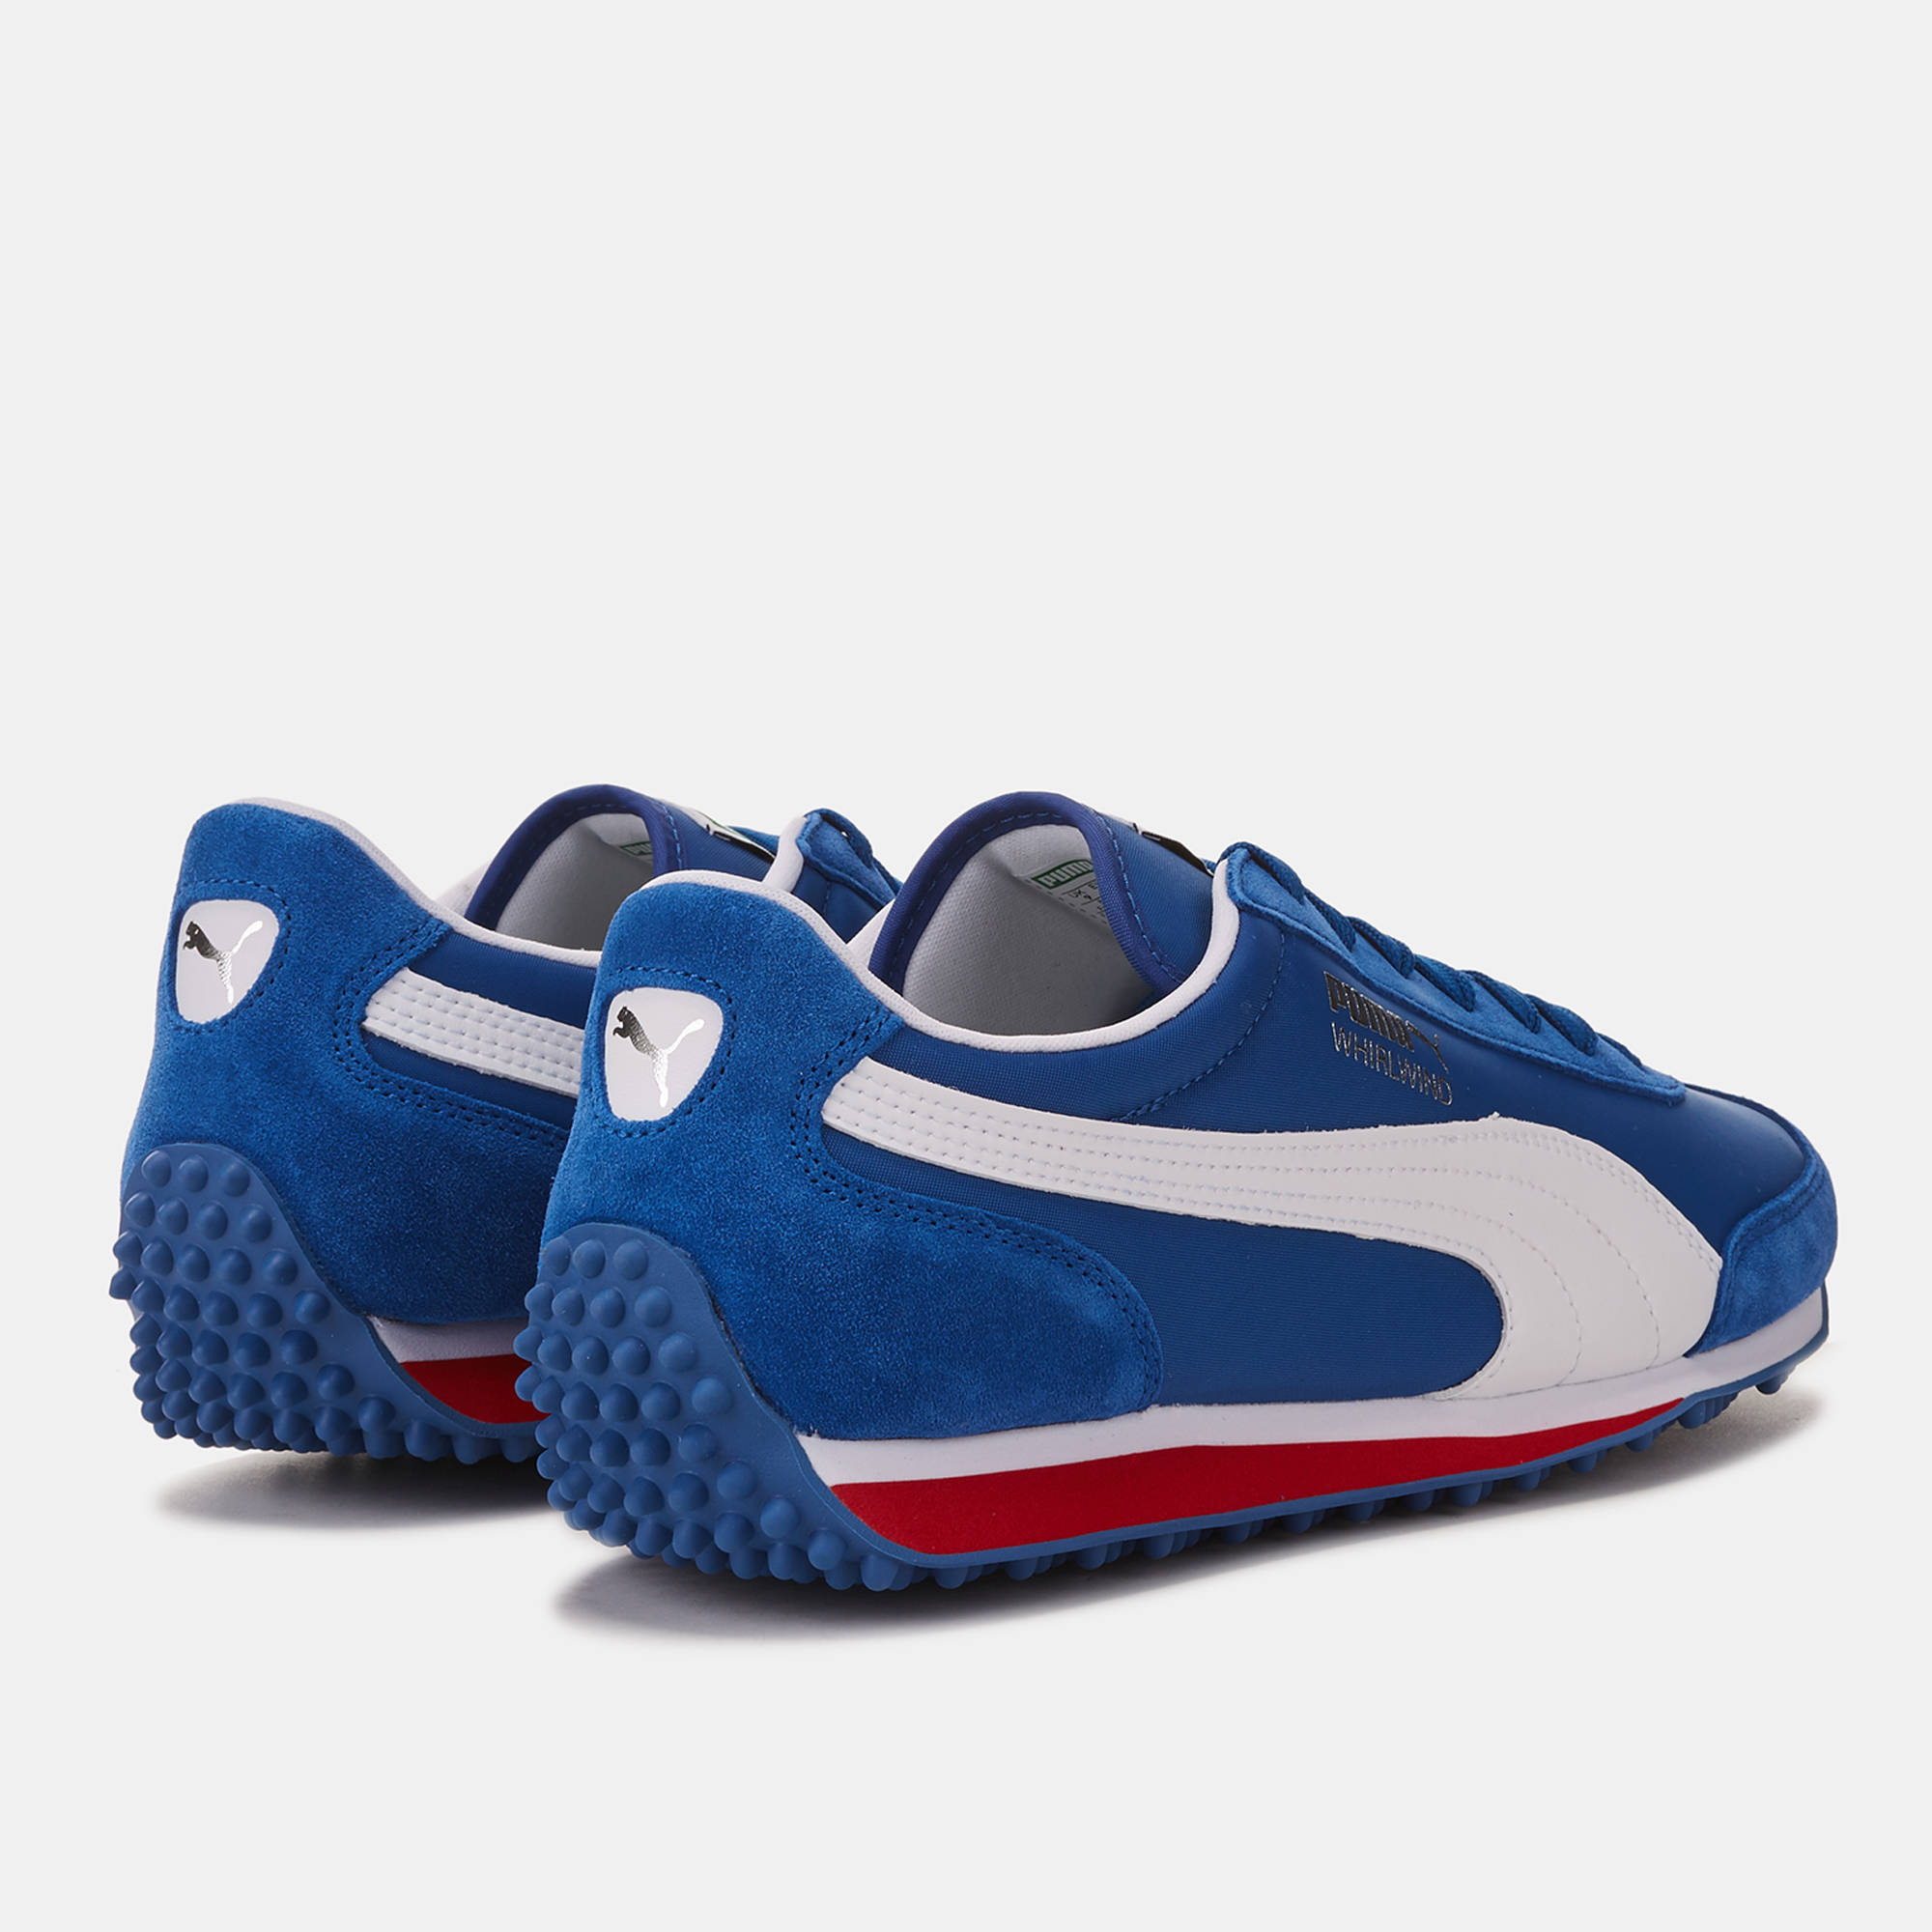 Shop Blue PUMA Whirlwind Classic Sneaker Shoe for Mens by PUMA | SSS